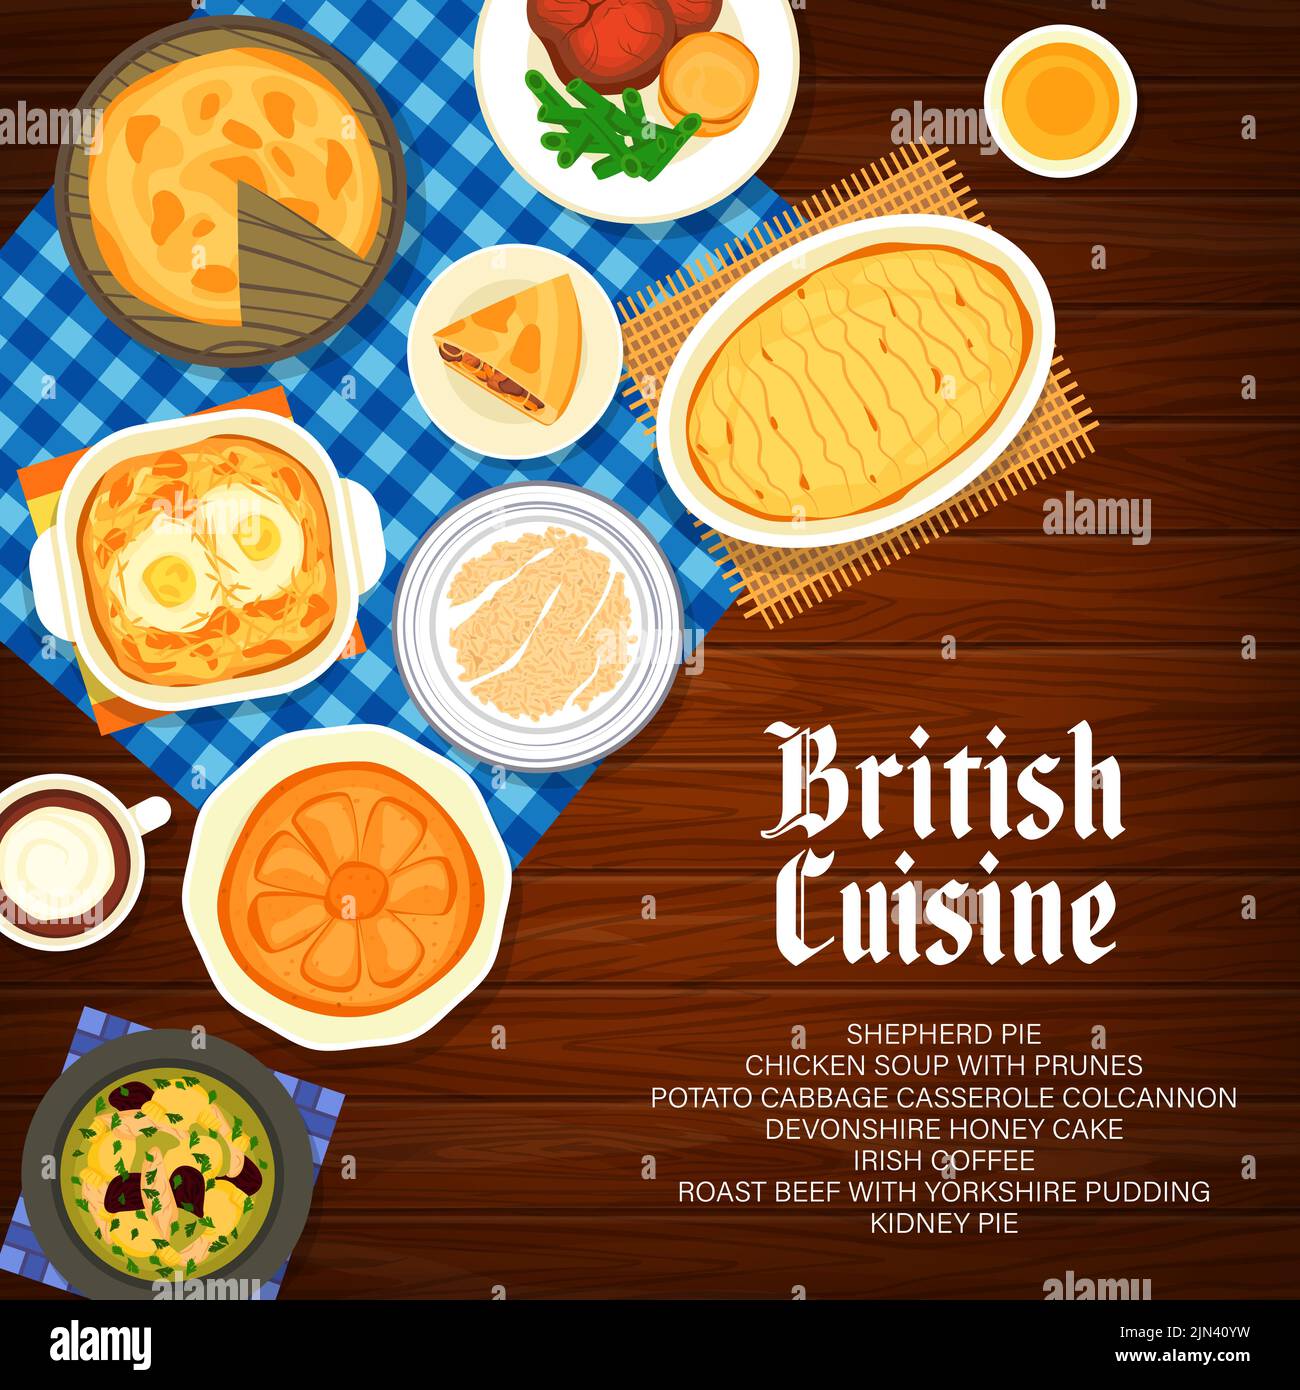 British cuisine food, restaurant menu cover, English dishes, breakfast and lunch meals, vector poster. Traditional British porridge and Irish coffee, Yorkshire pudding and Devonshire honey cake Stock Vector